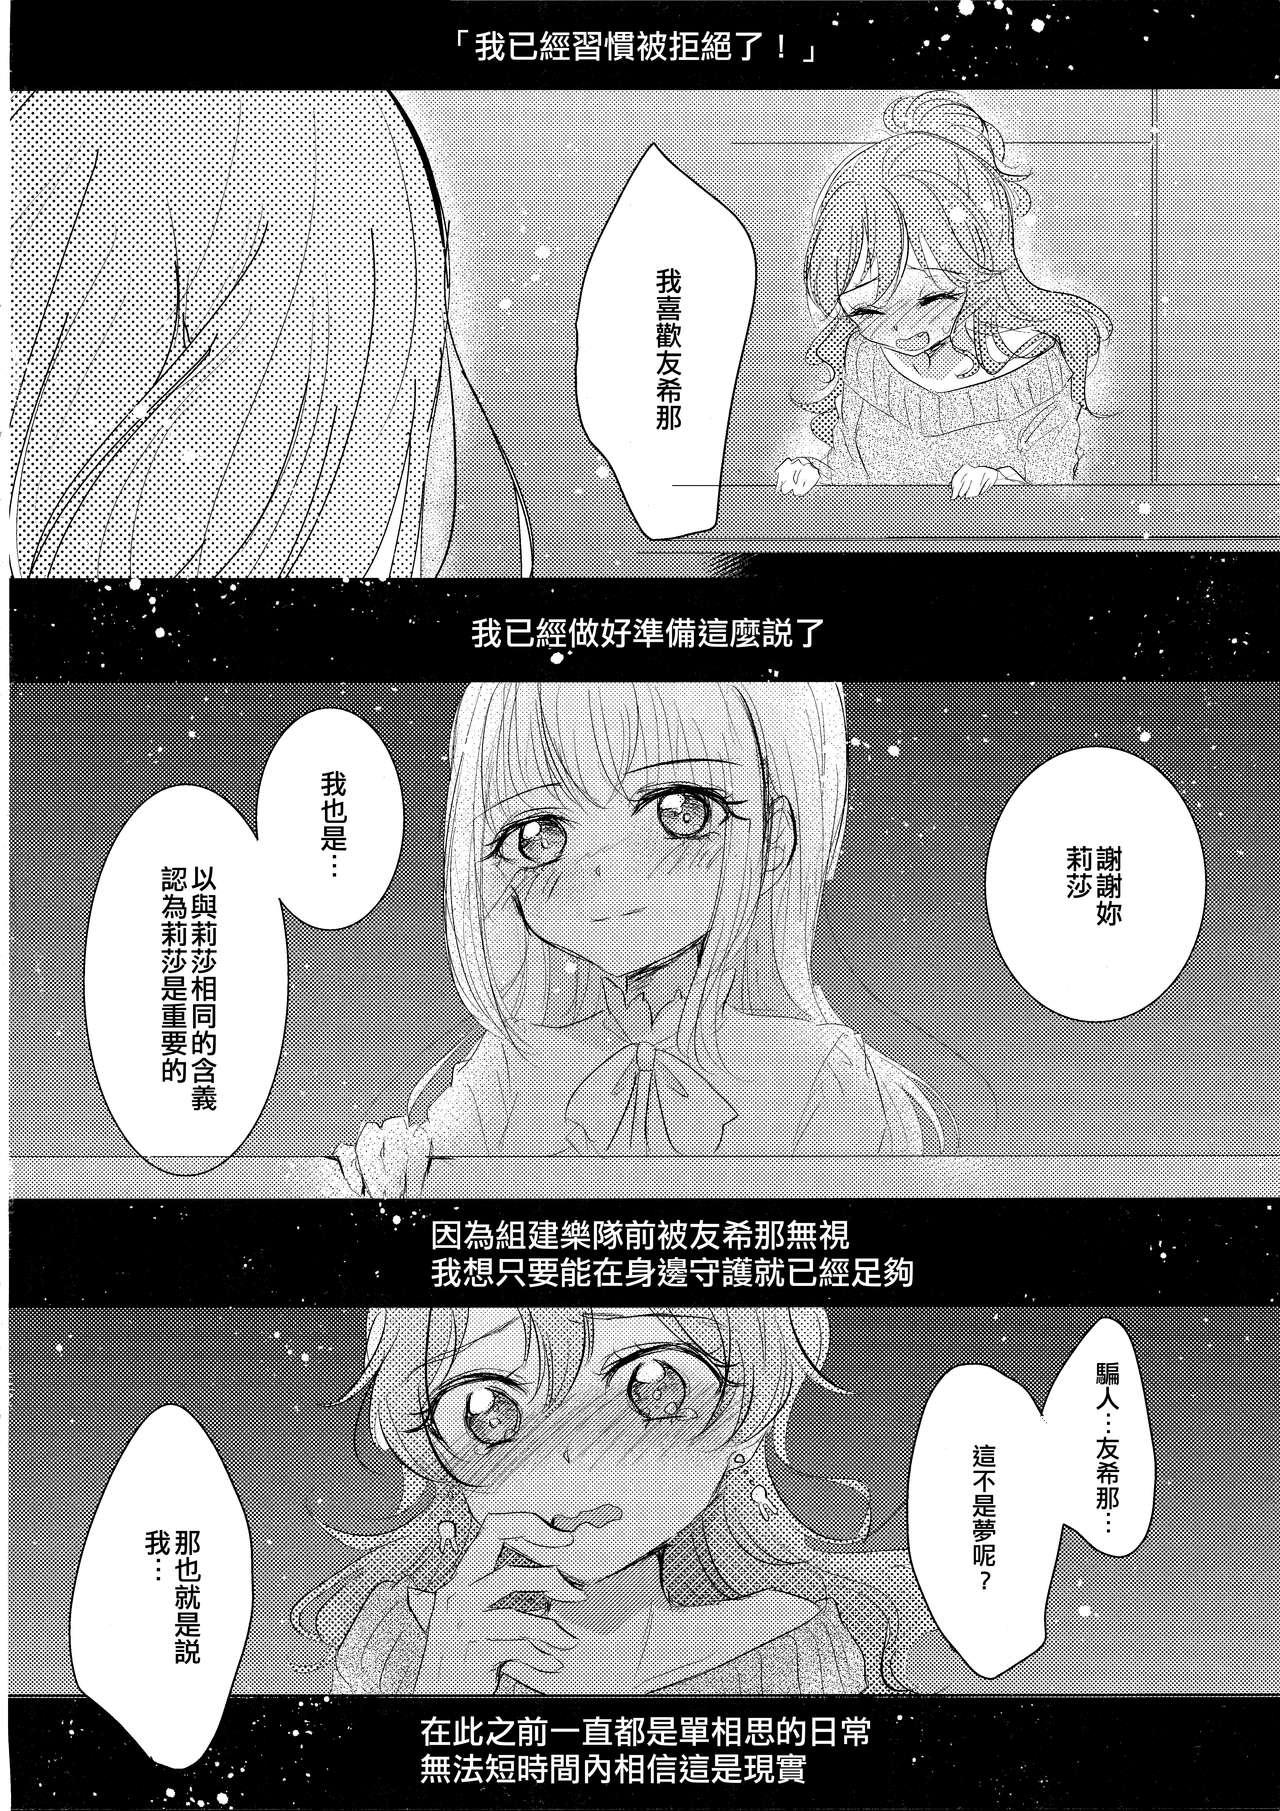 Daddy sweet sweet not yet - Bang dream Art - Page 4